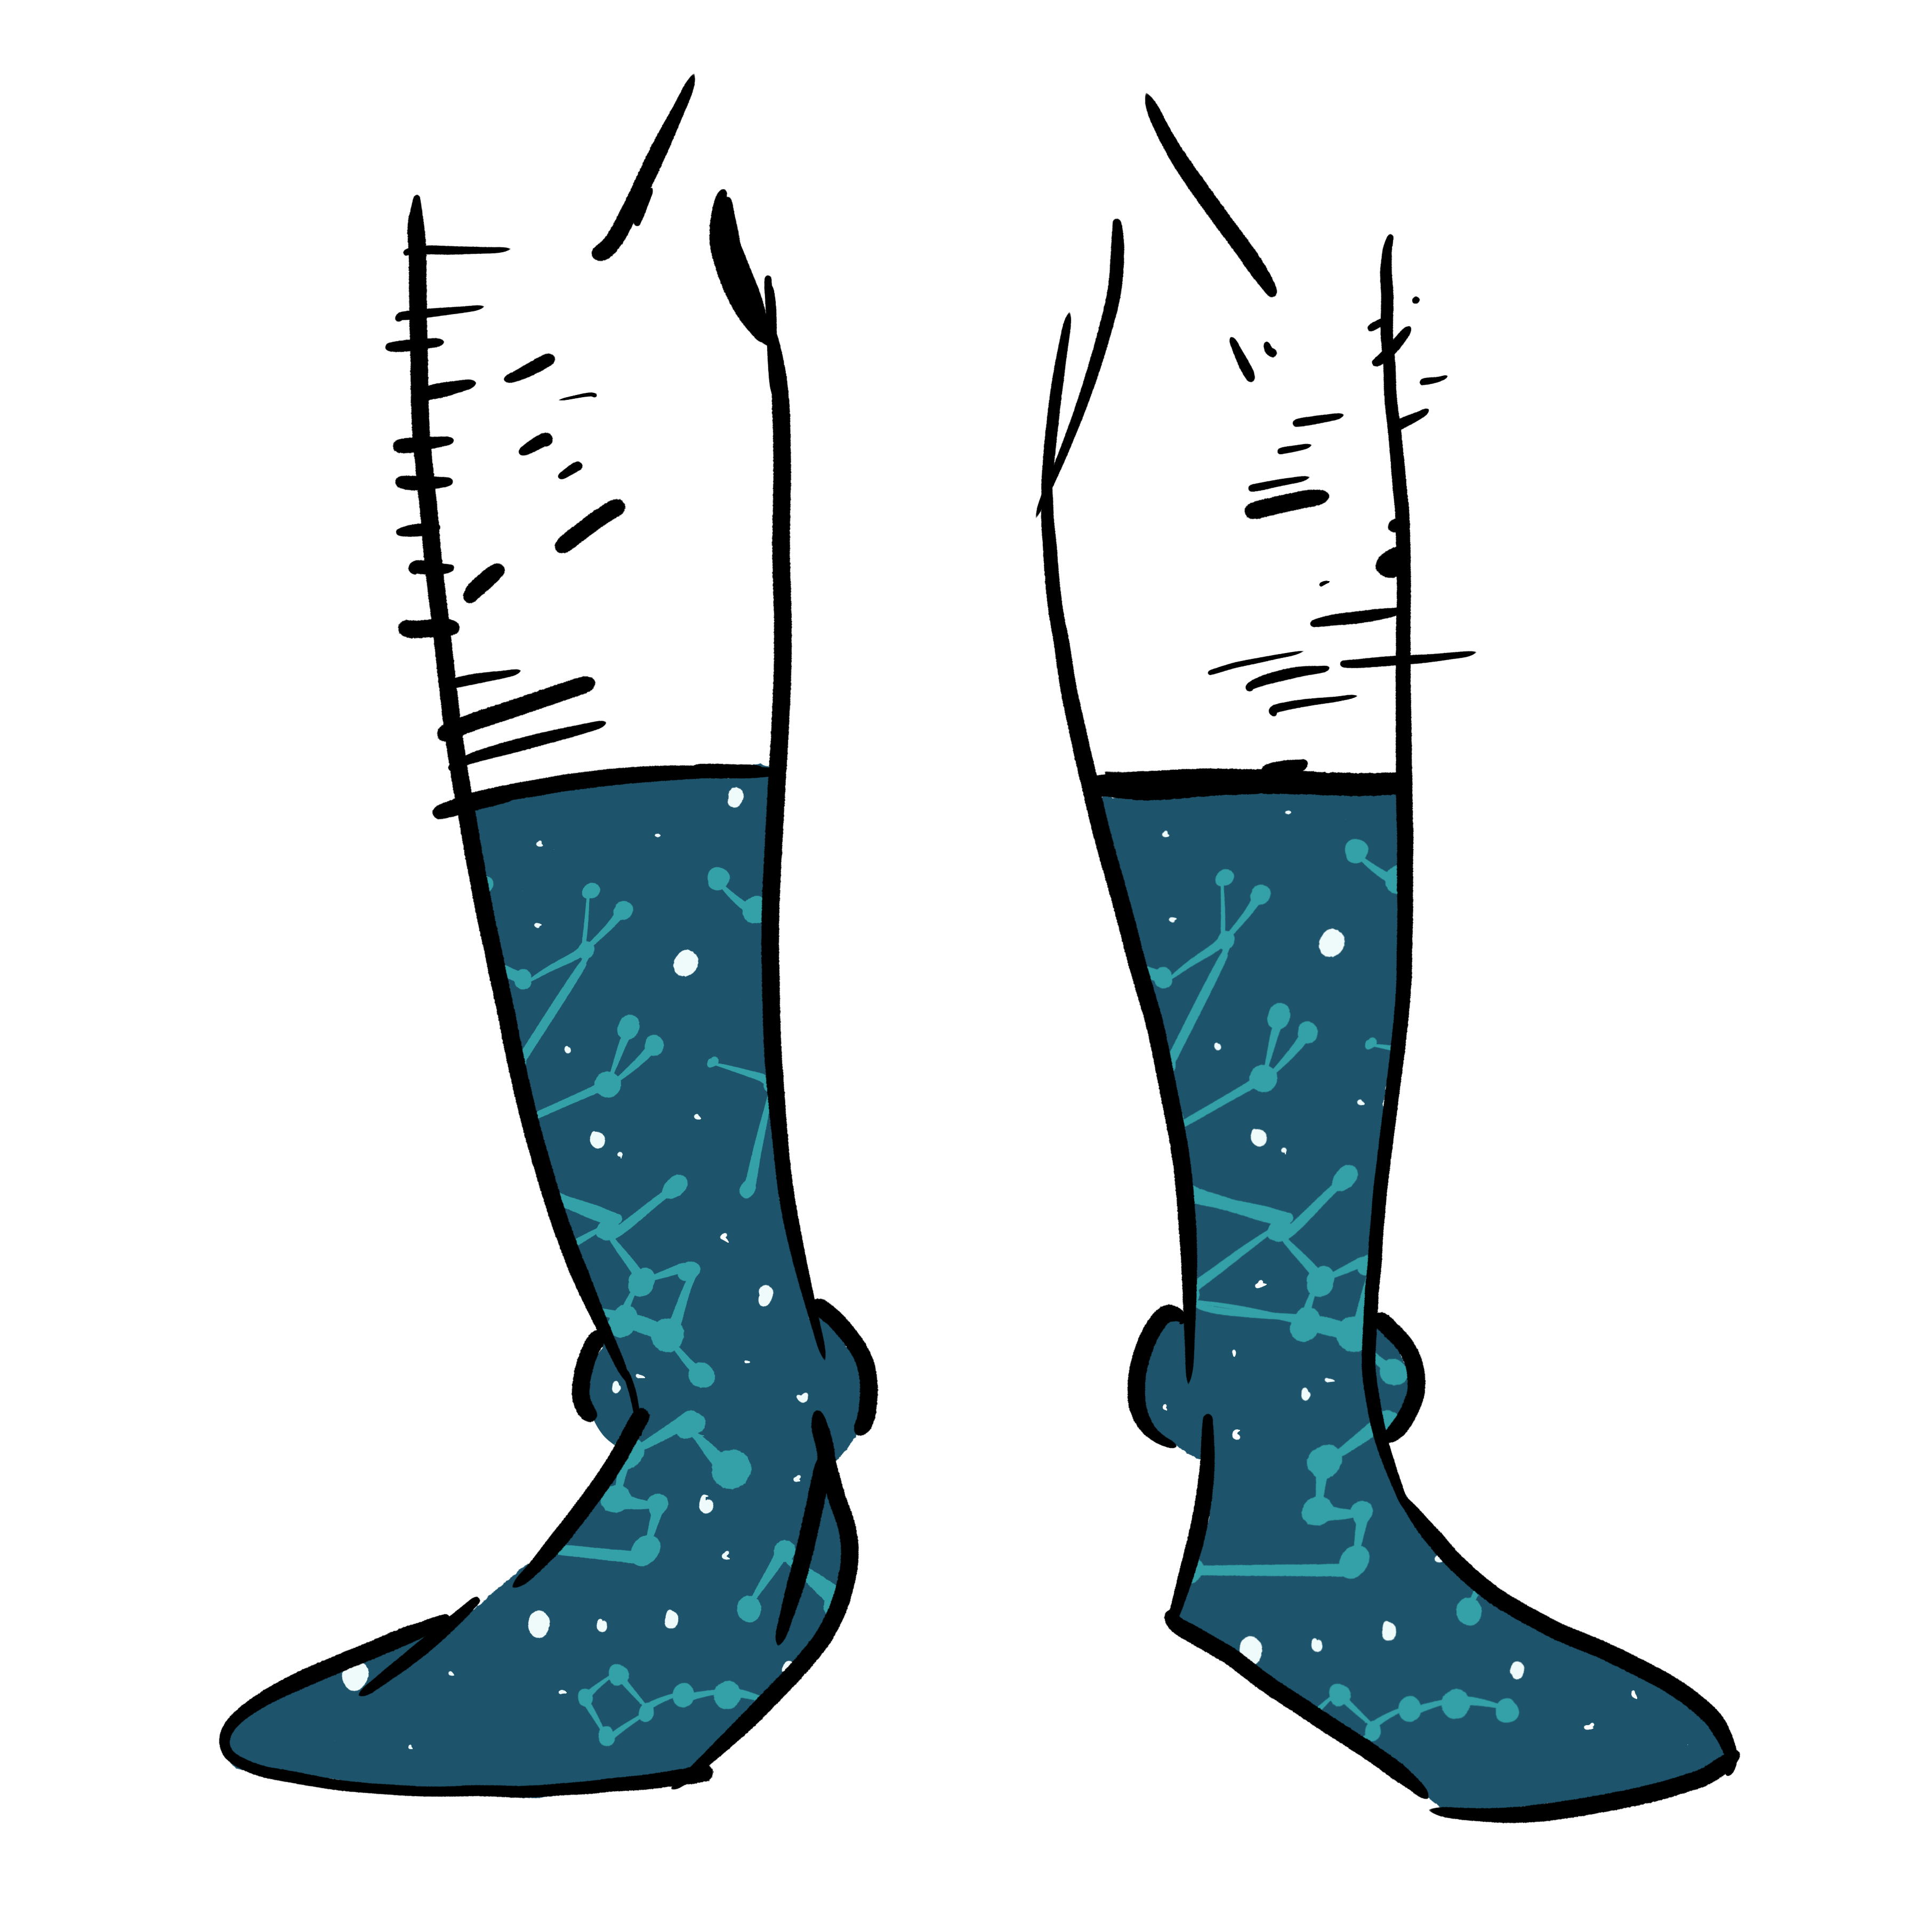 Dark teal socks with light teal drawings of constellations on them.